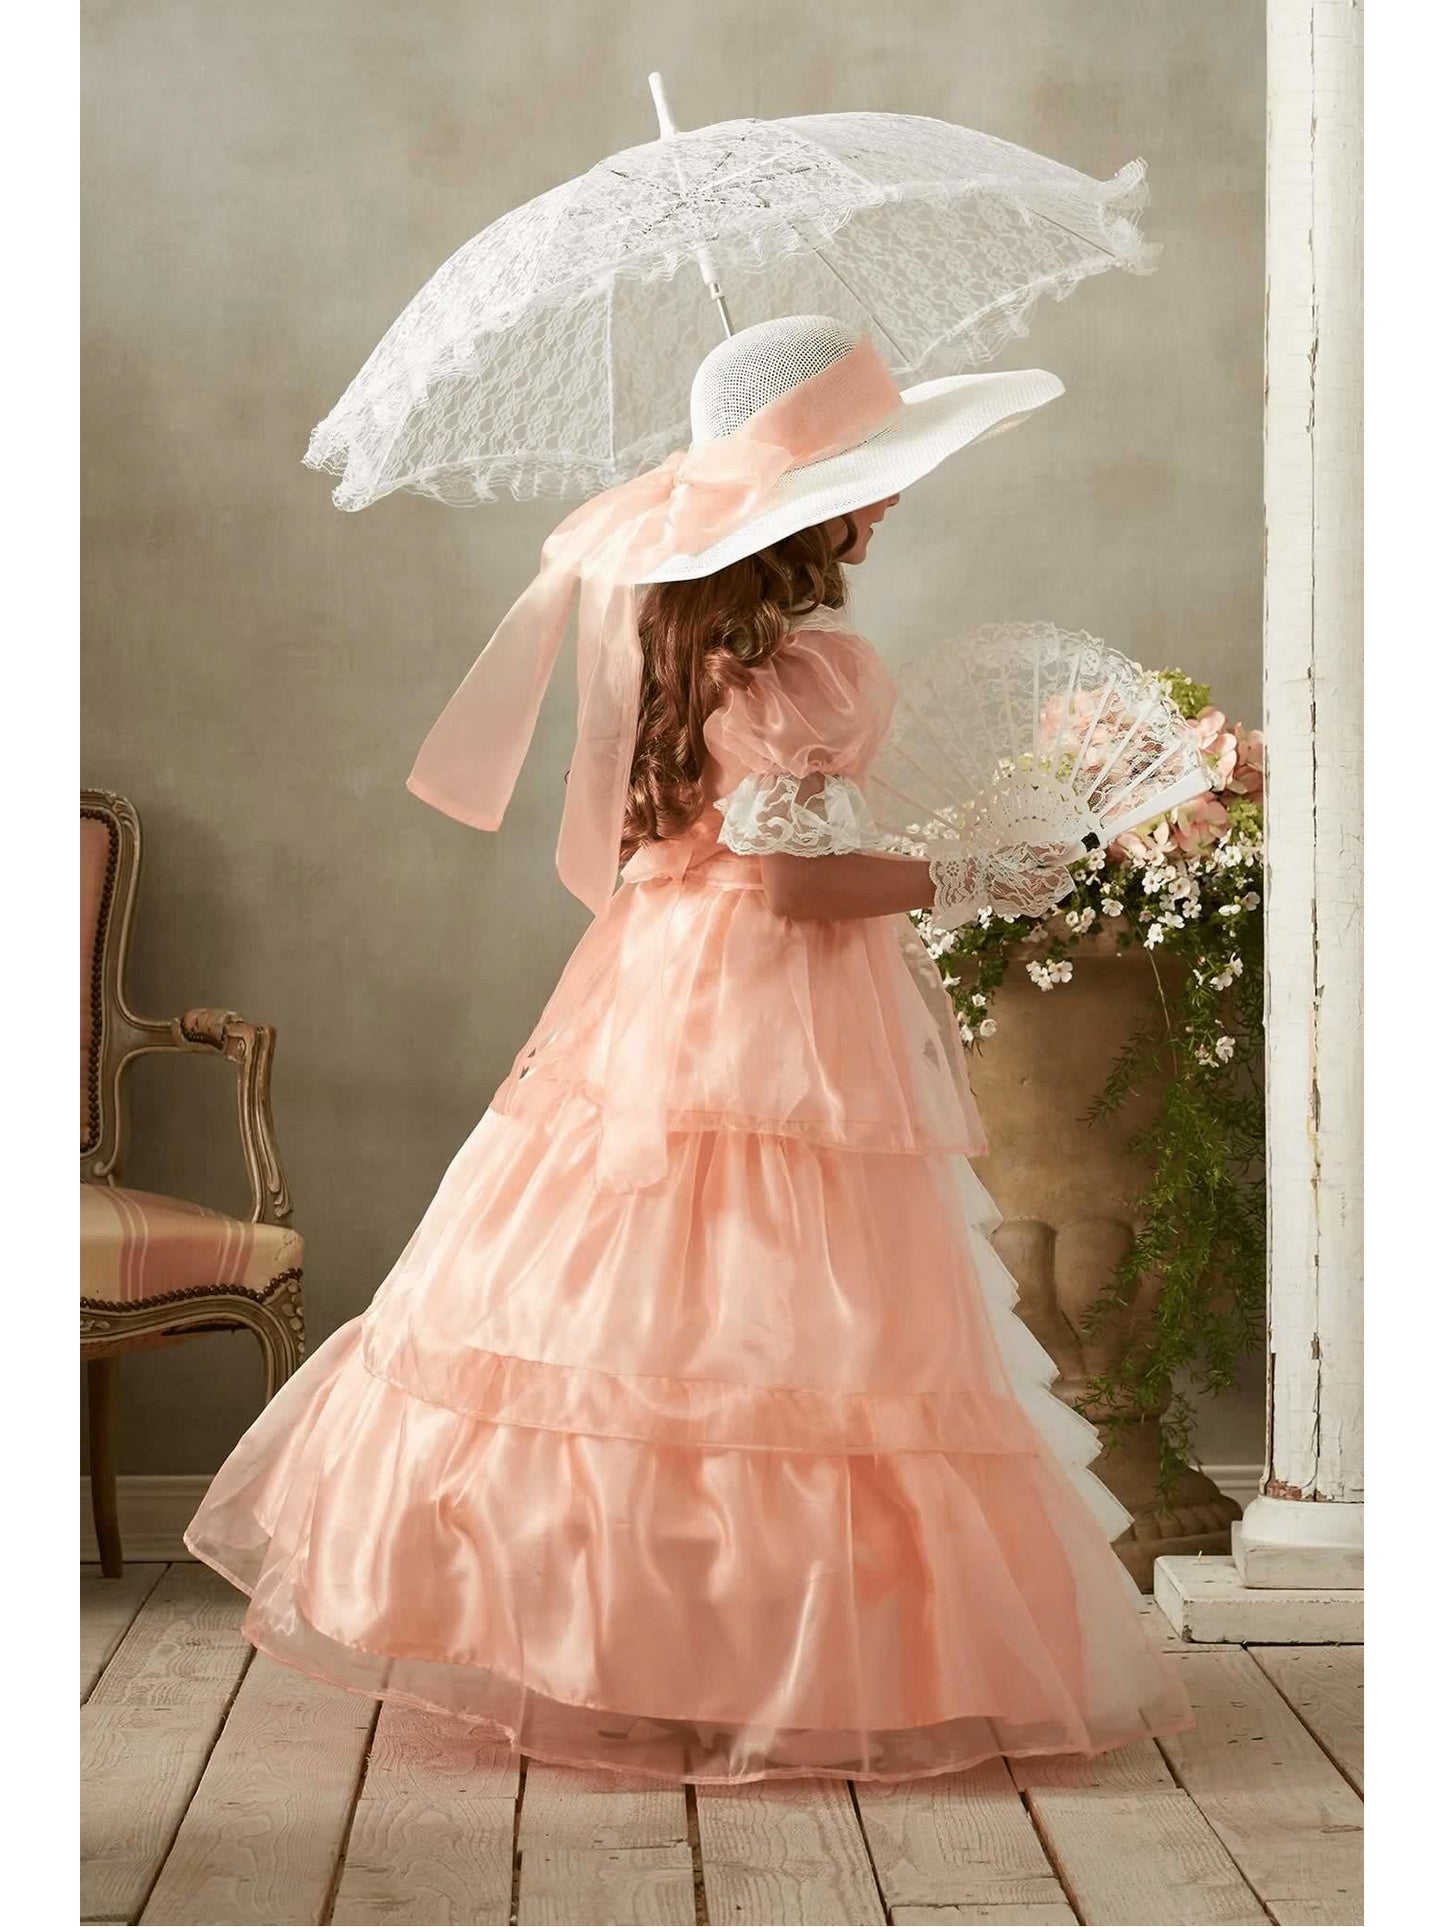 Peachy Southern Belle Costume for Girls  pea alt2